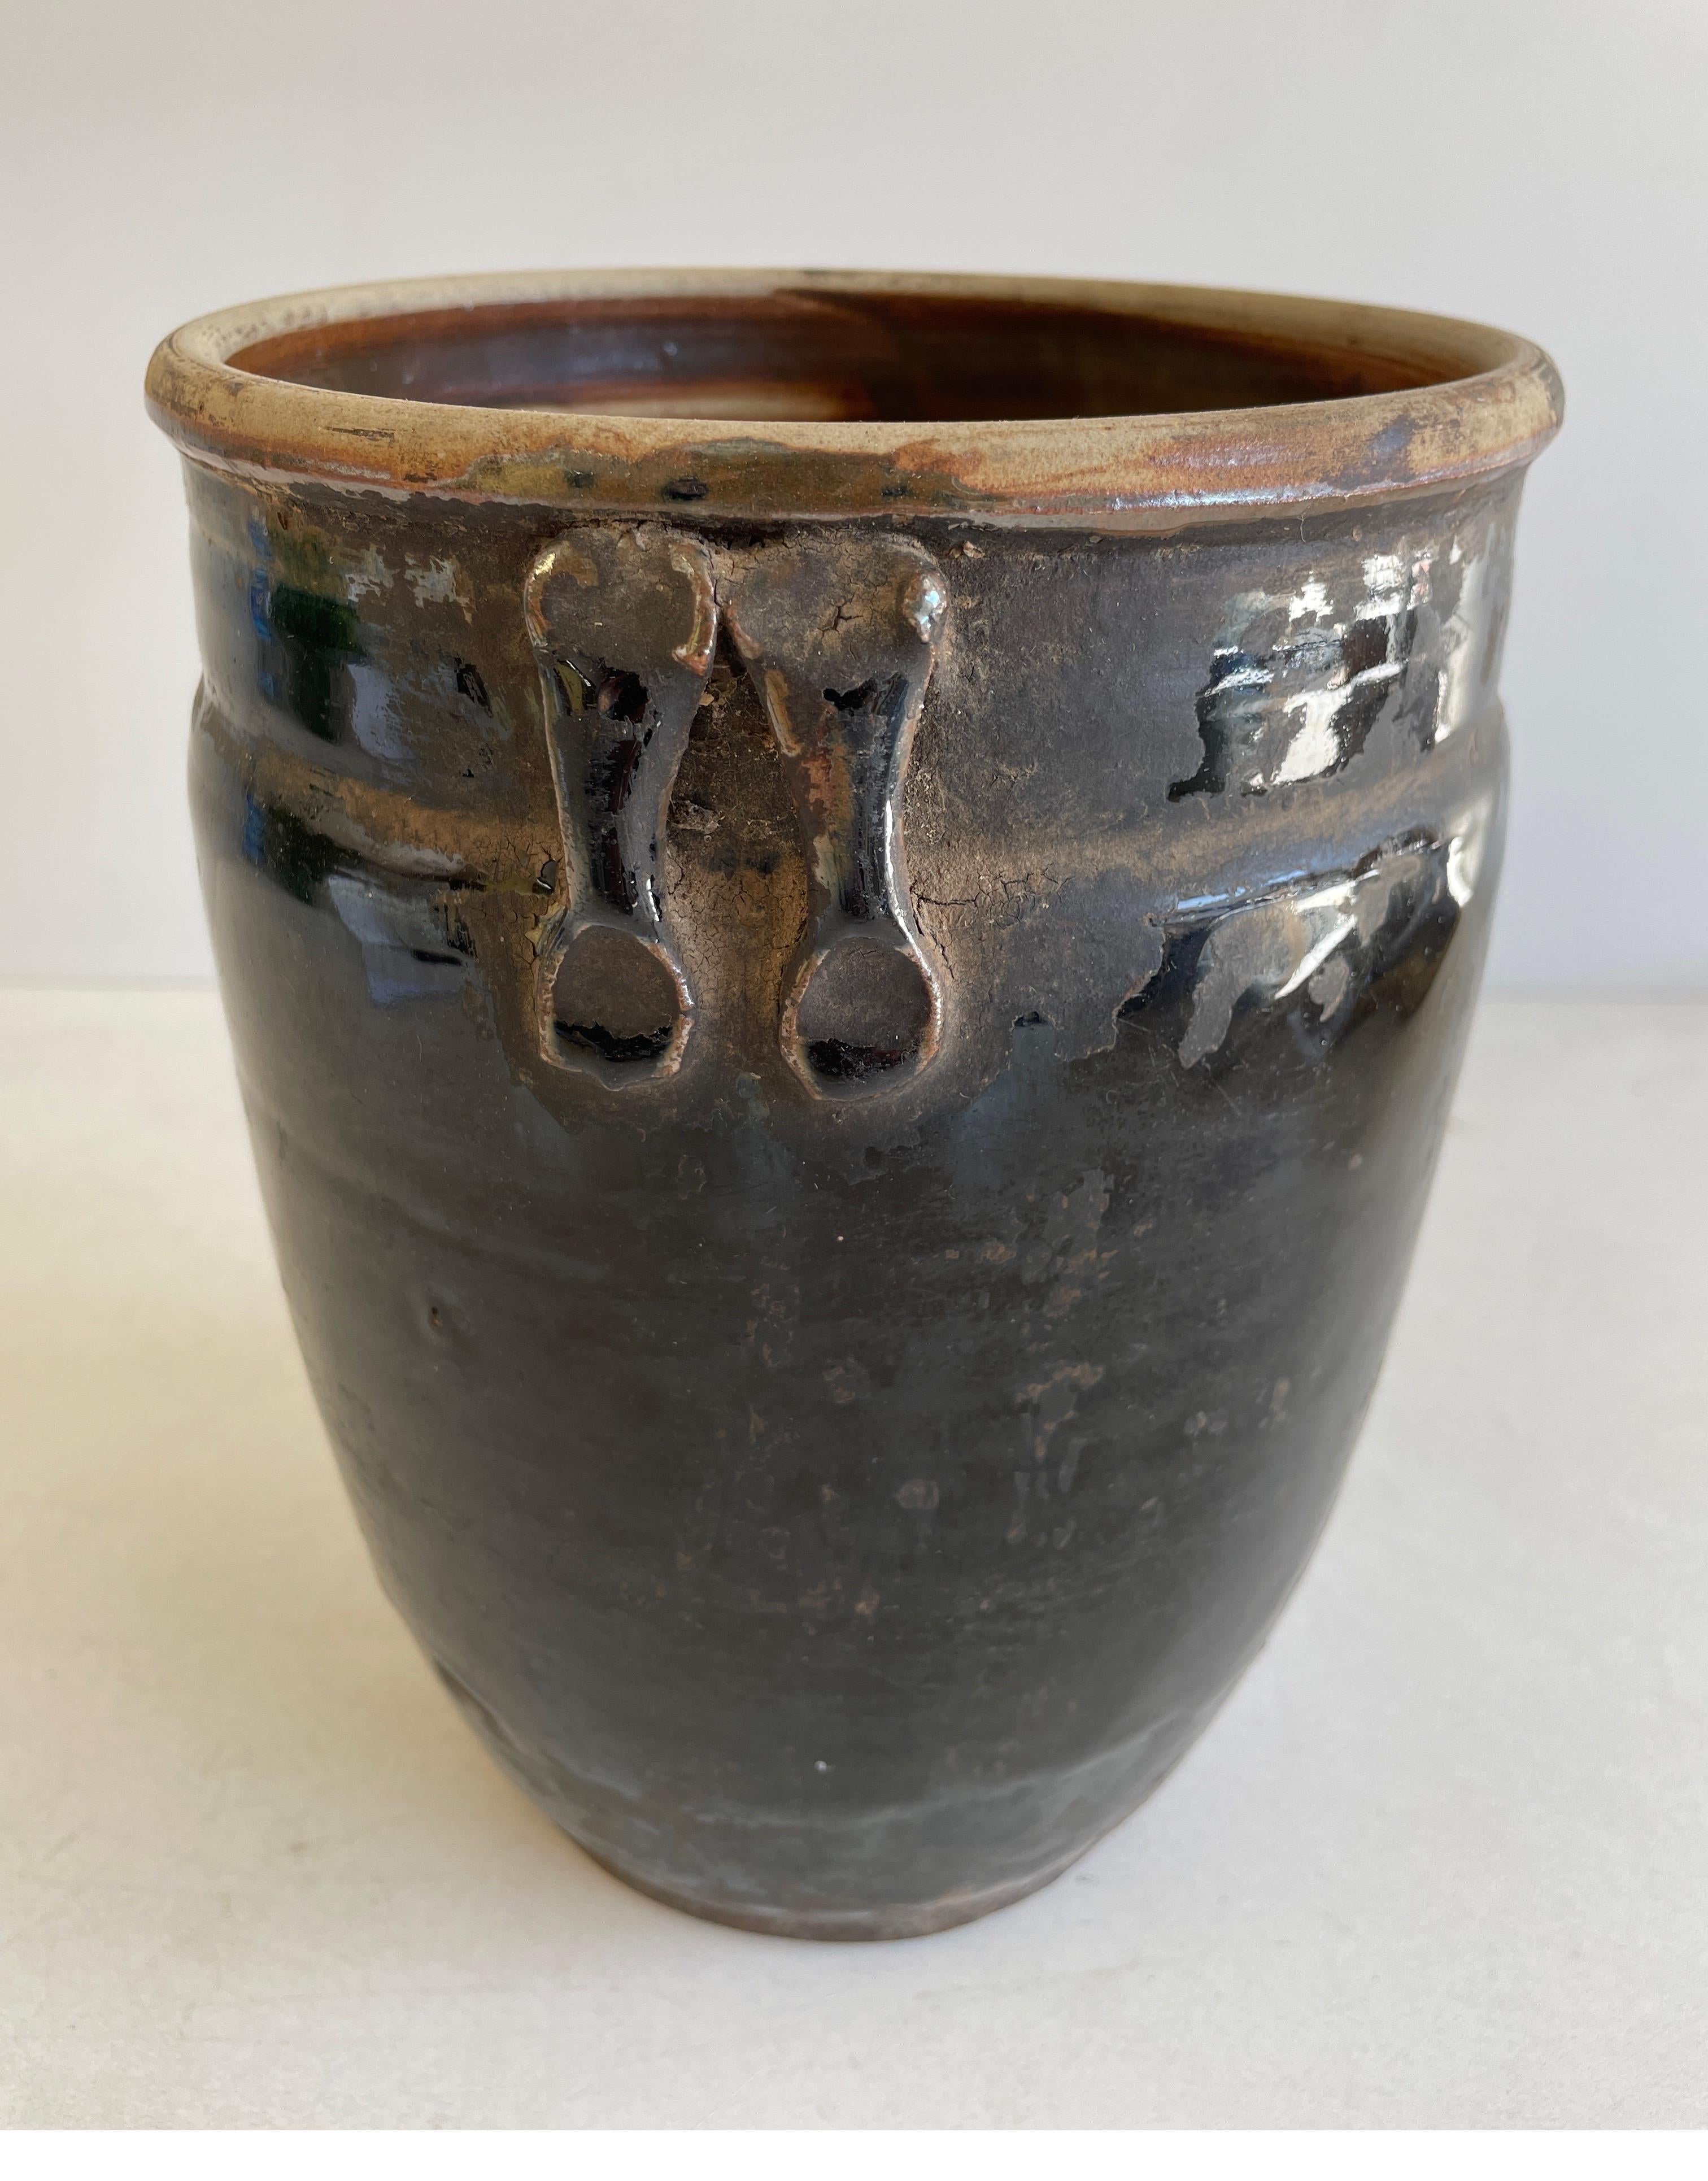 Beautifully glazed and rich in character, this vintage glazed oil pot adds just the right amount of texture + warmth where you need it. Stunning black glazed finish with warm terra-cotta accents.

Sizing 9” H x 6.5” D x 6.5” W.